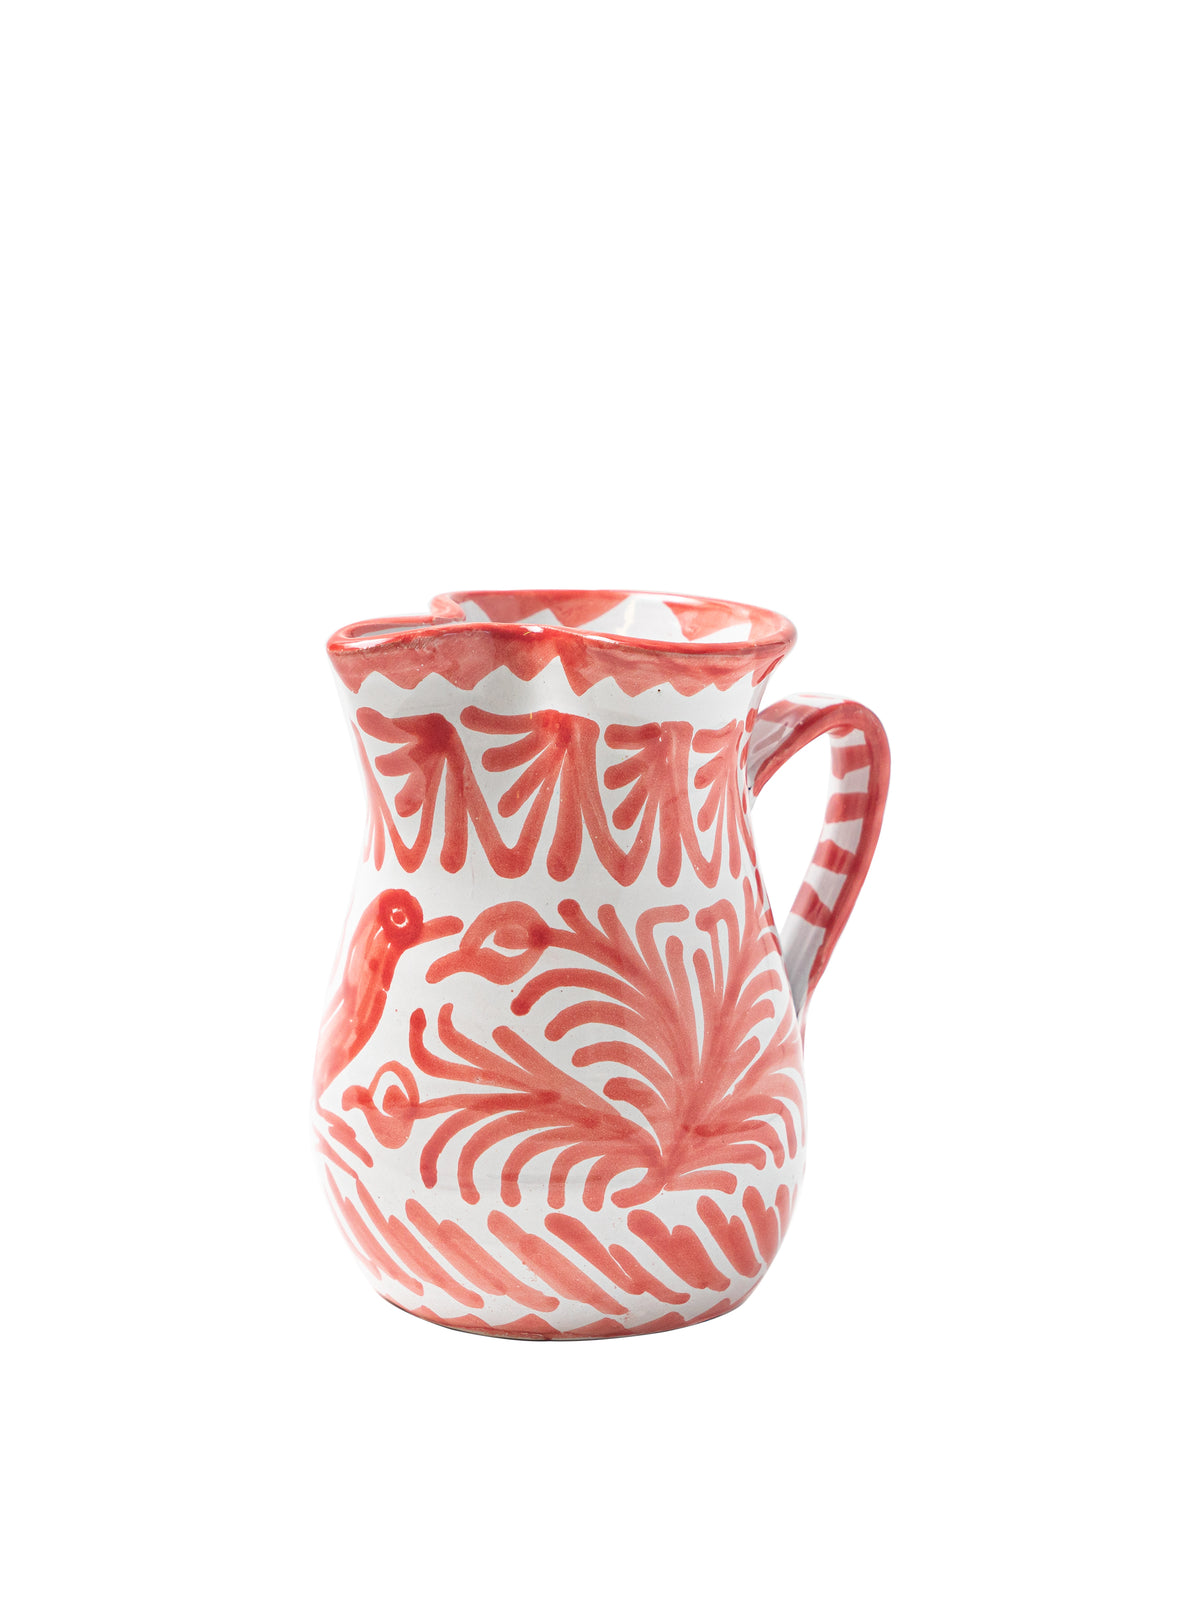 Casa Coral Small Pitcher with Hand-painted Designs